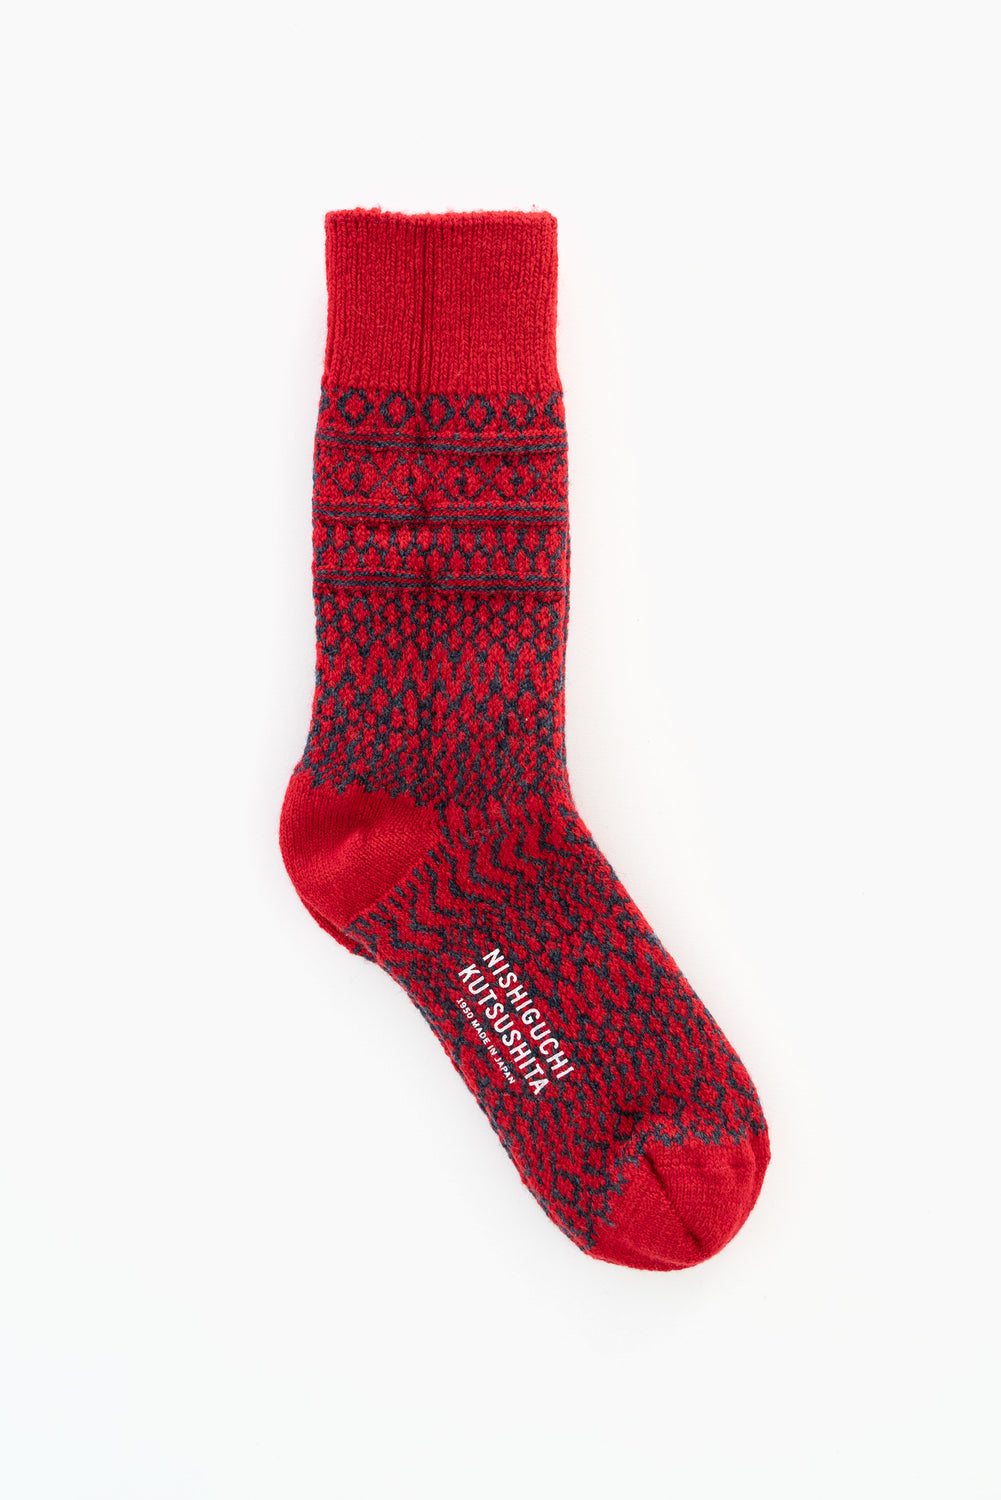 Wool Jacquard Socks, Red (Size M  + L Only)